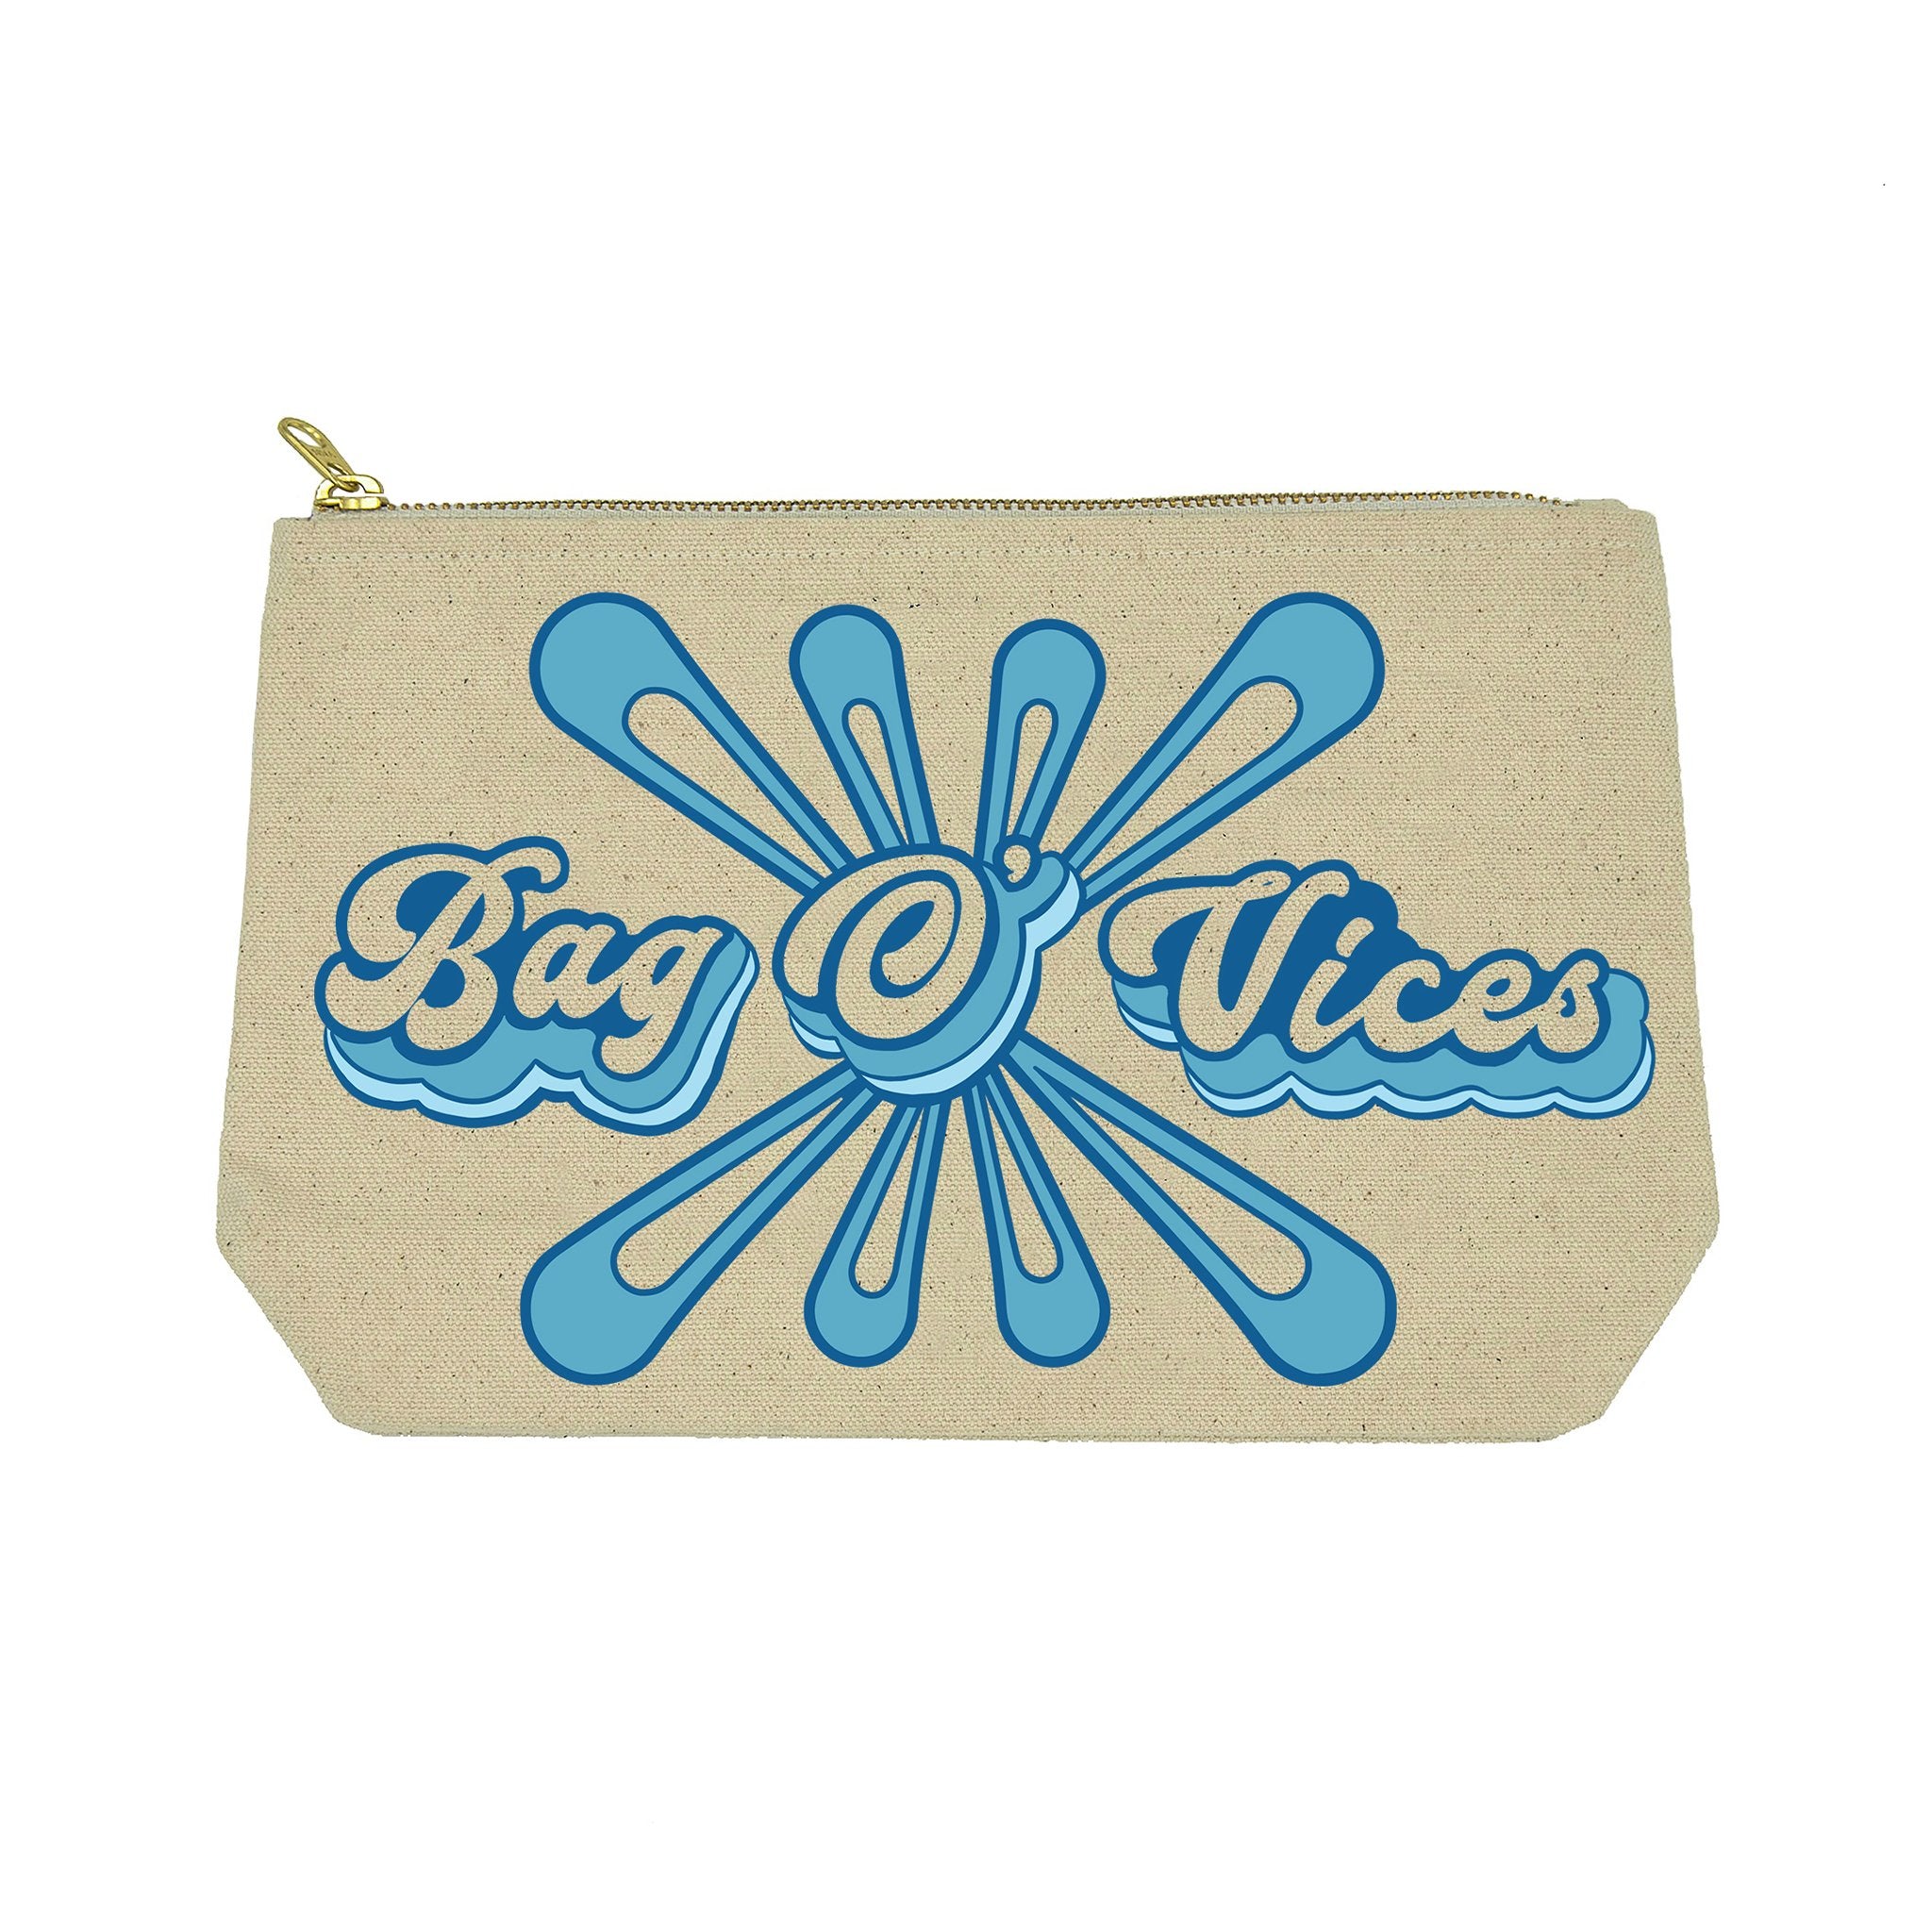 Twisted Wares Bag O' Vices Storage Pouch